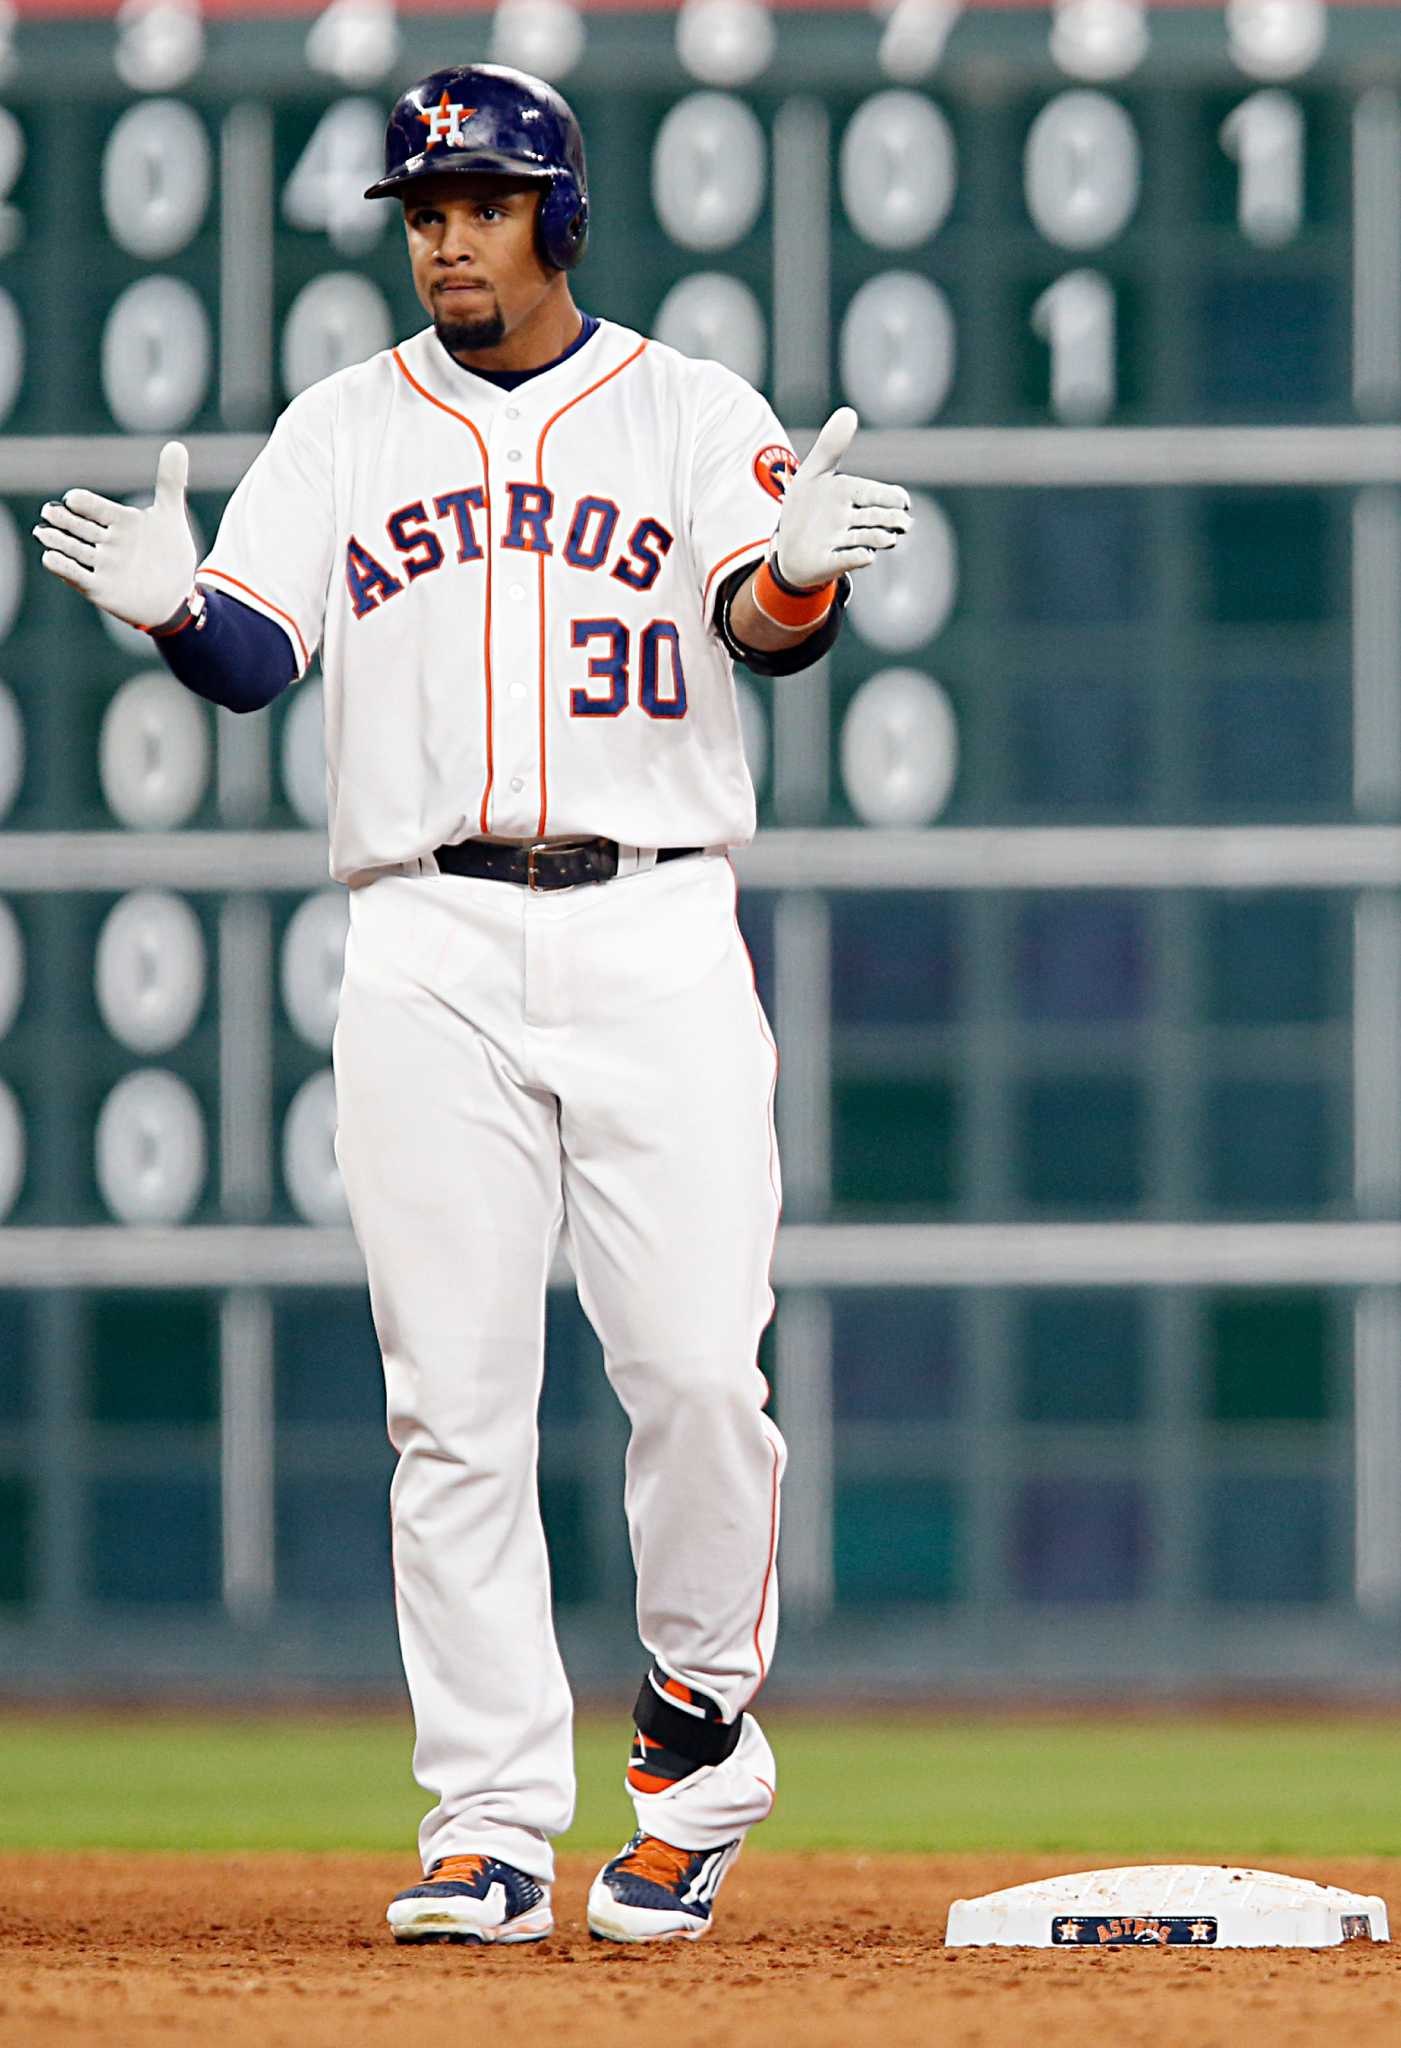 Astros report: Carlos Gomez feels 'weird' as visitor at Miller Park